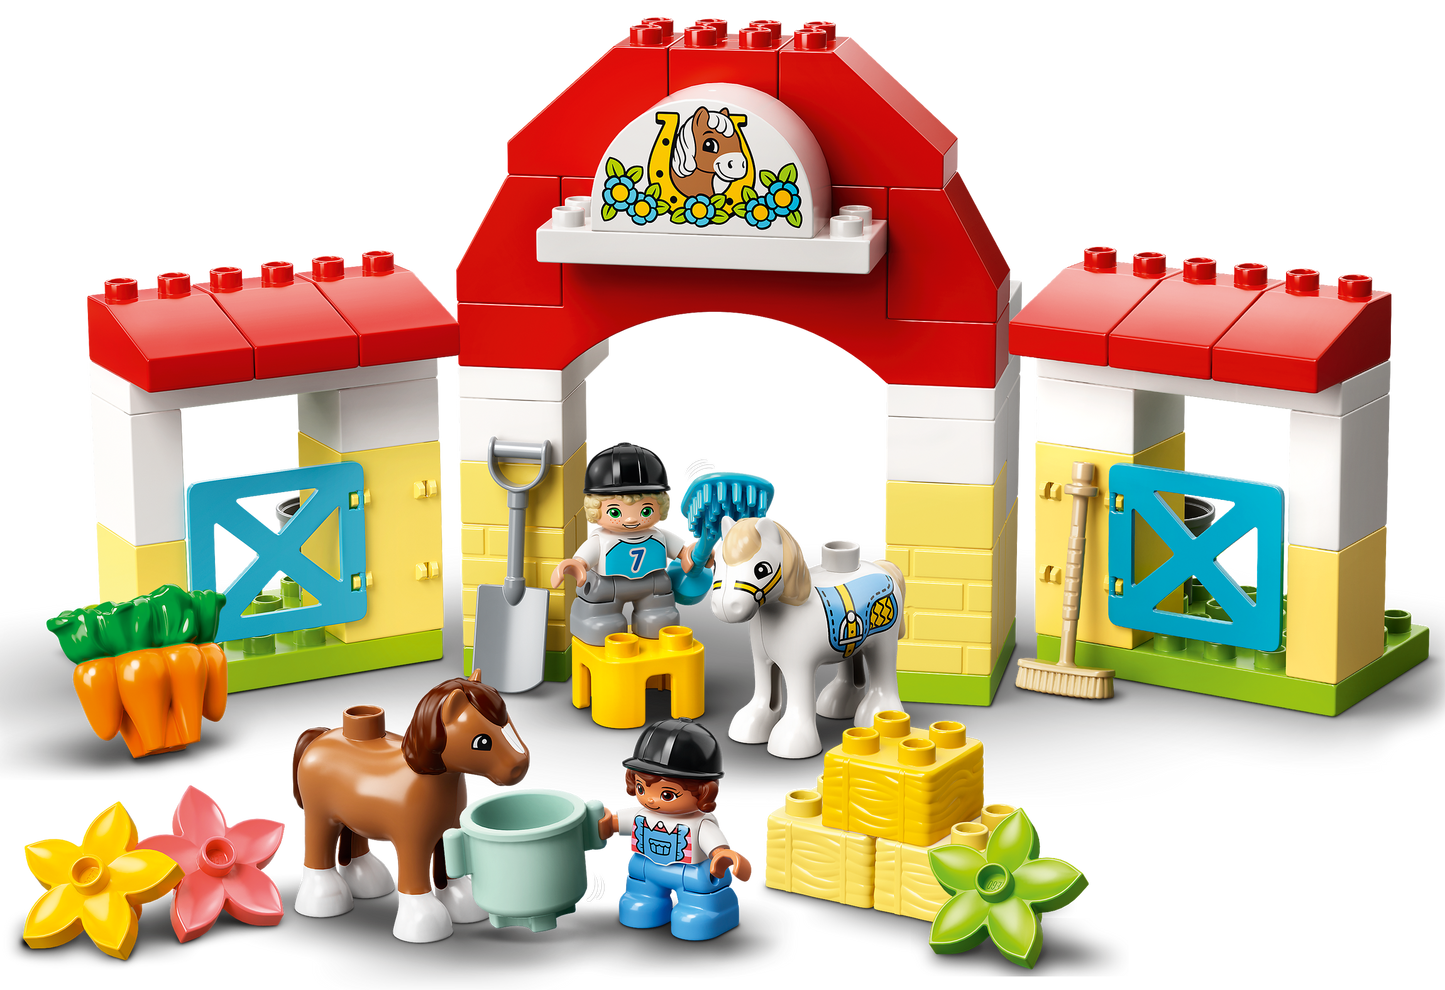 LEGO Duplo Horse Stable and Pony Care 10951